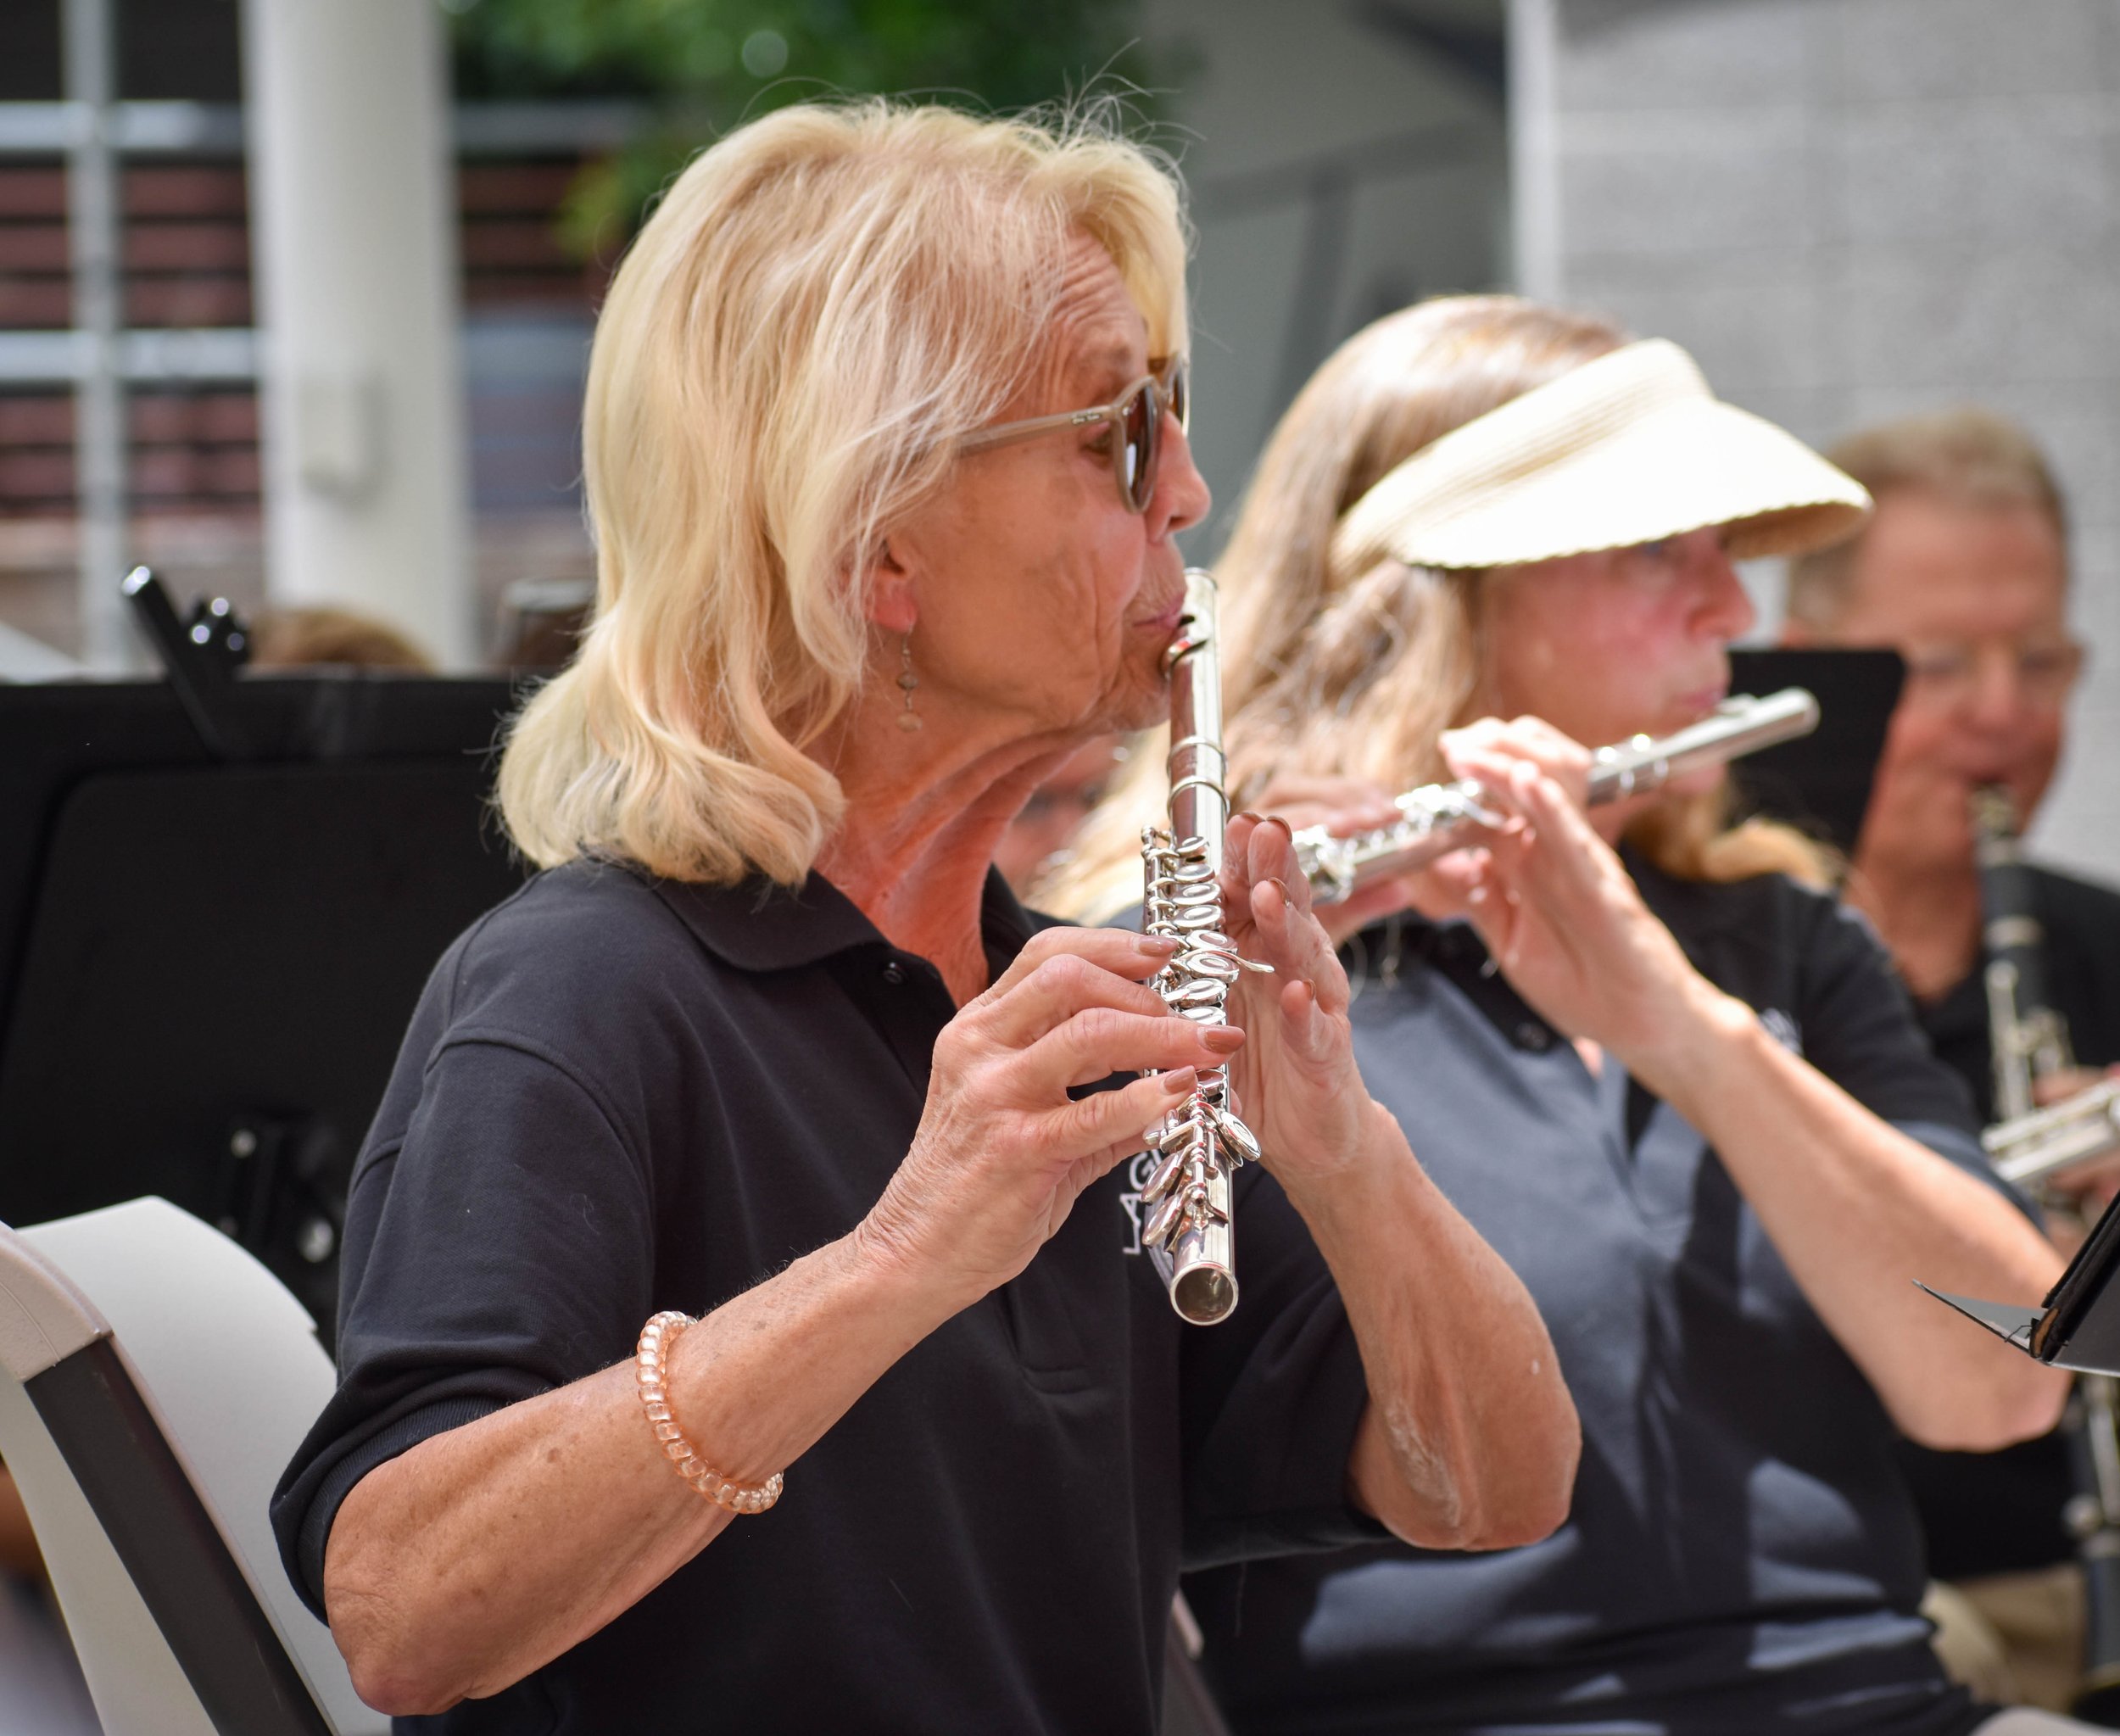 07-17-2022 LCCB Fest of Arts Summer Concert Series by Peyton Webster33-19.jpg